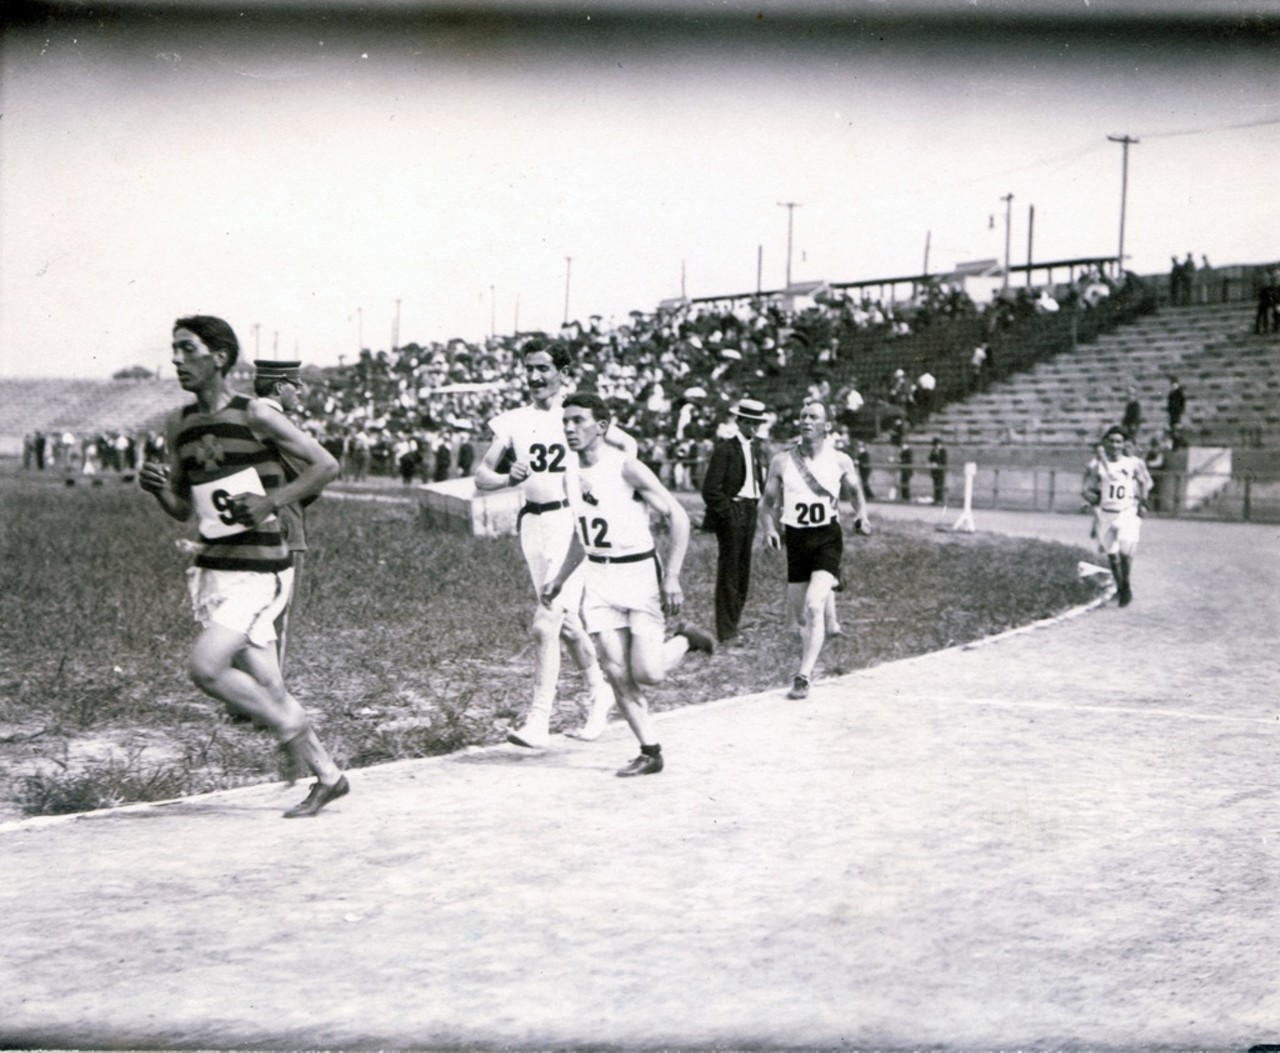 The men's marathon was straight up bonkers.
The 1904 Olympics hosted a 24-mile marathon in 90 degree weather. Not only was it hot outside, there were only two hydration stations due to one of the organizers wanting to conduct an experiment on dehydration.